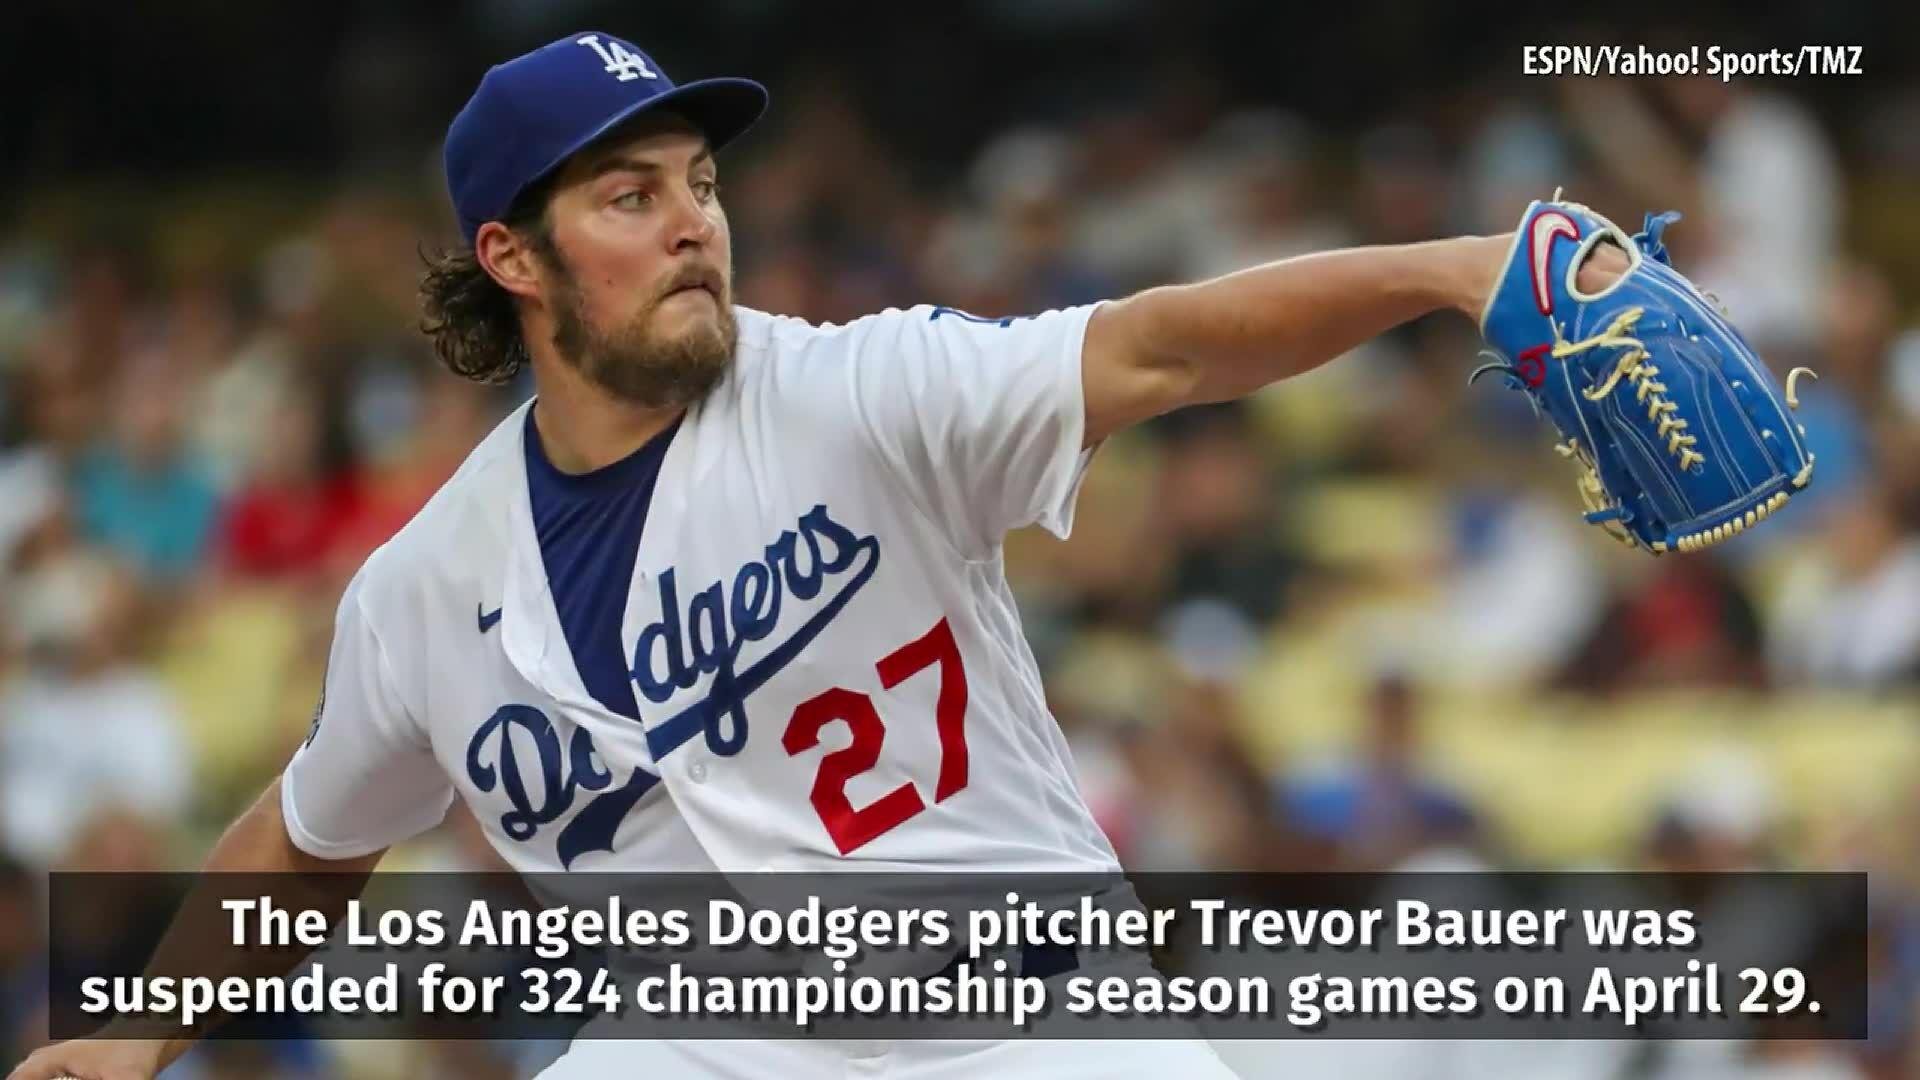 LA Dodgers Pitcher Trevor Bauer Suspended From MLB for 2 Years